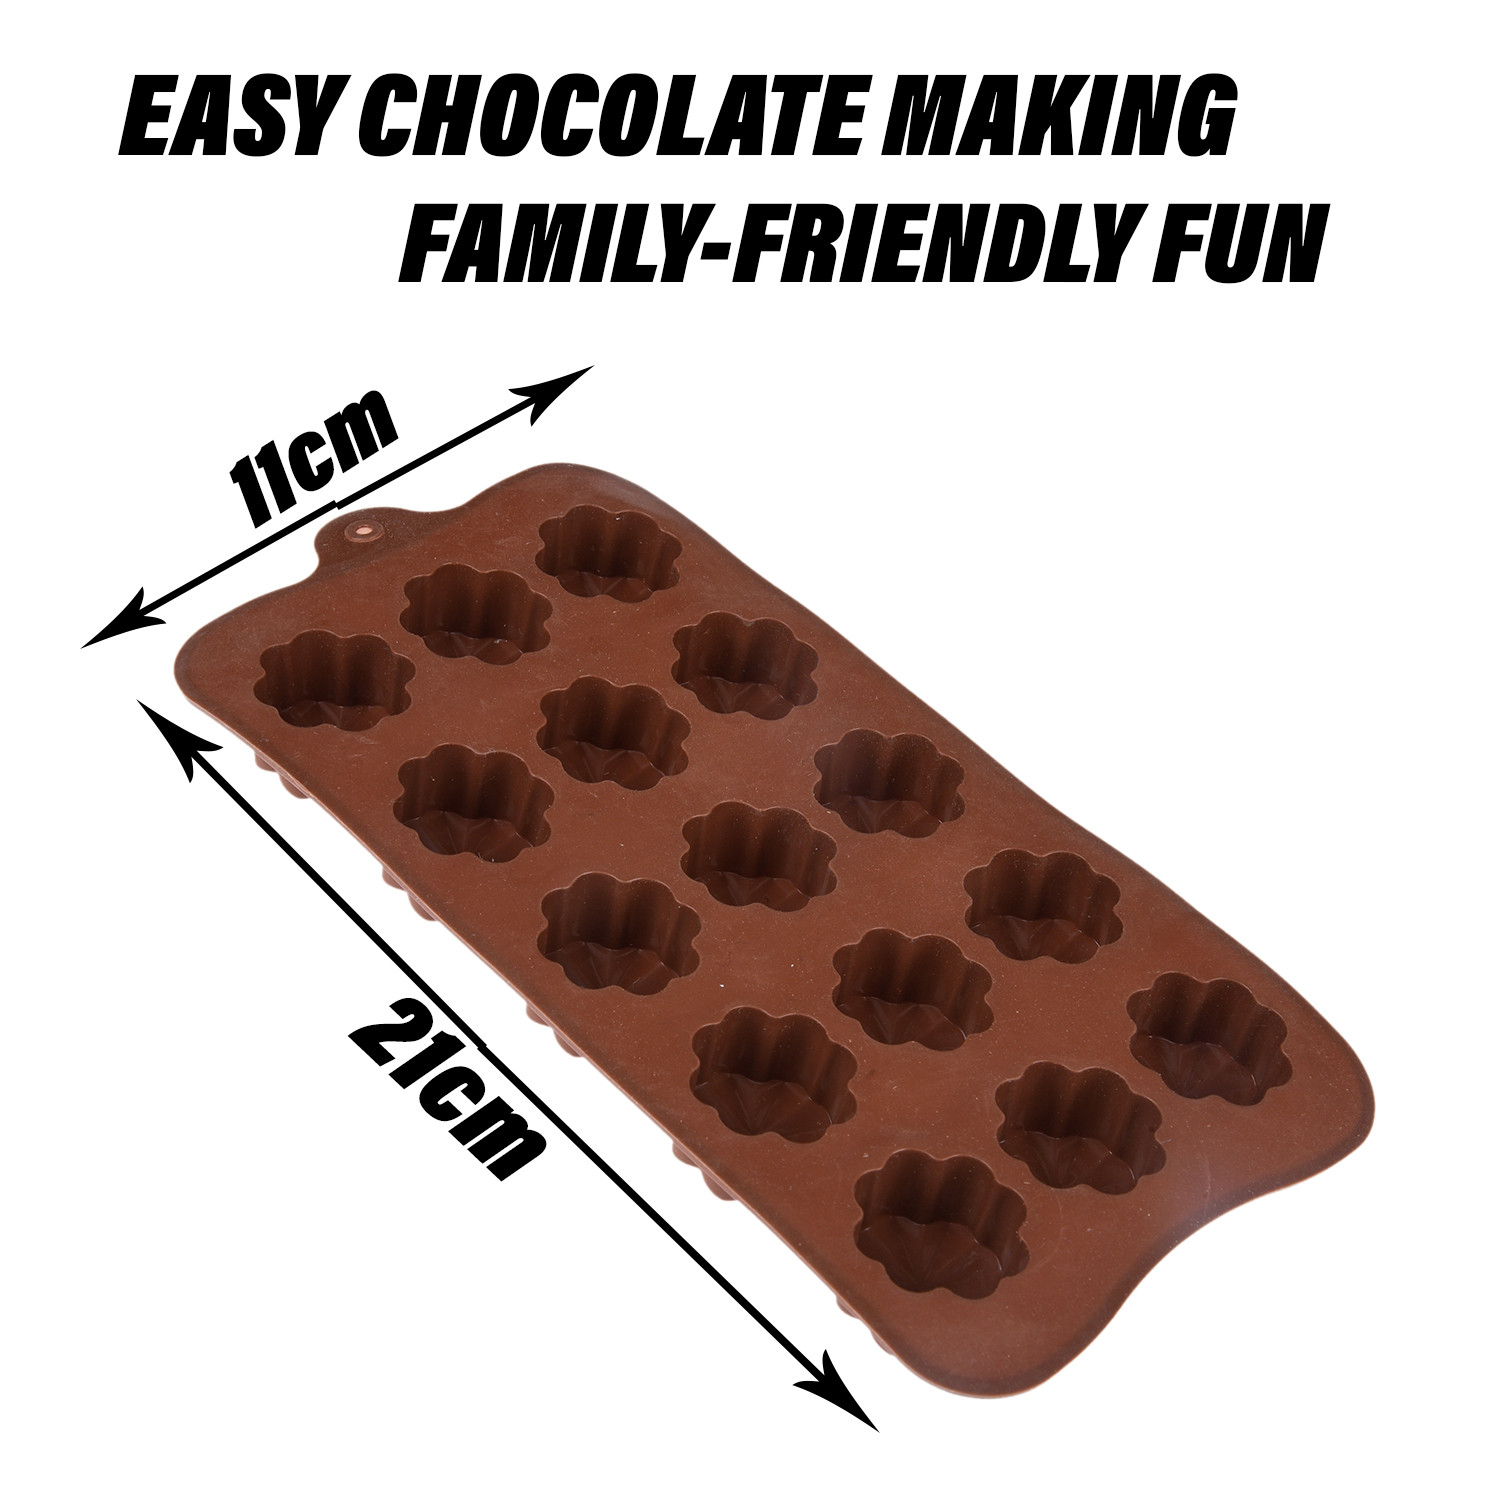 Kuber Industries Chocolate Mould | Silicone Cookies Mould Cake | Chocolate Cookies Tray | Flower Chocolate Mould Tray | Non-Stick Cookies Moulds | Candy Mold Tray | Brown